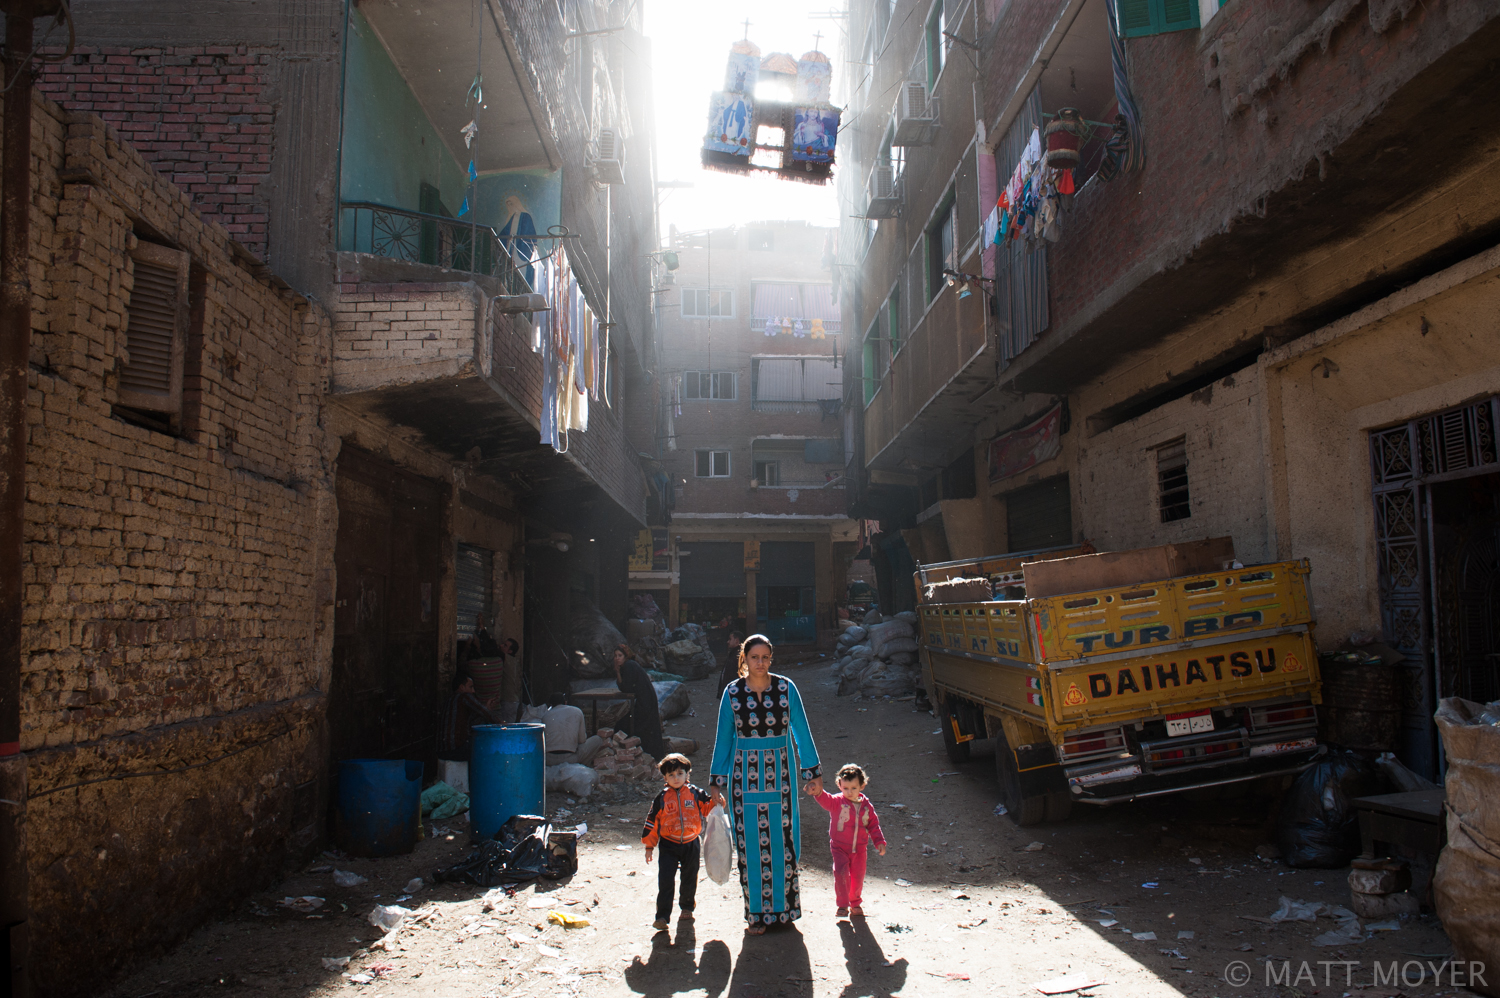  Egyptians walk in the street in a Coptic Christian part of town in Cairo, Egypt. 